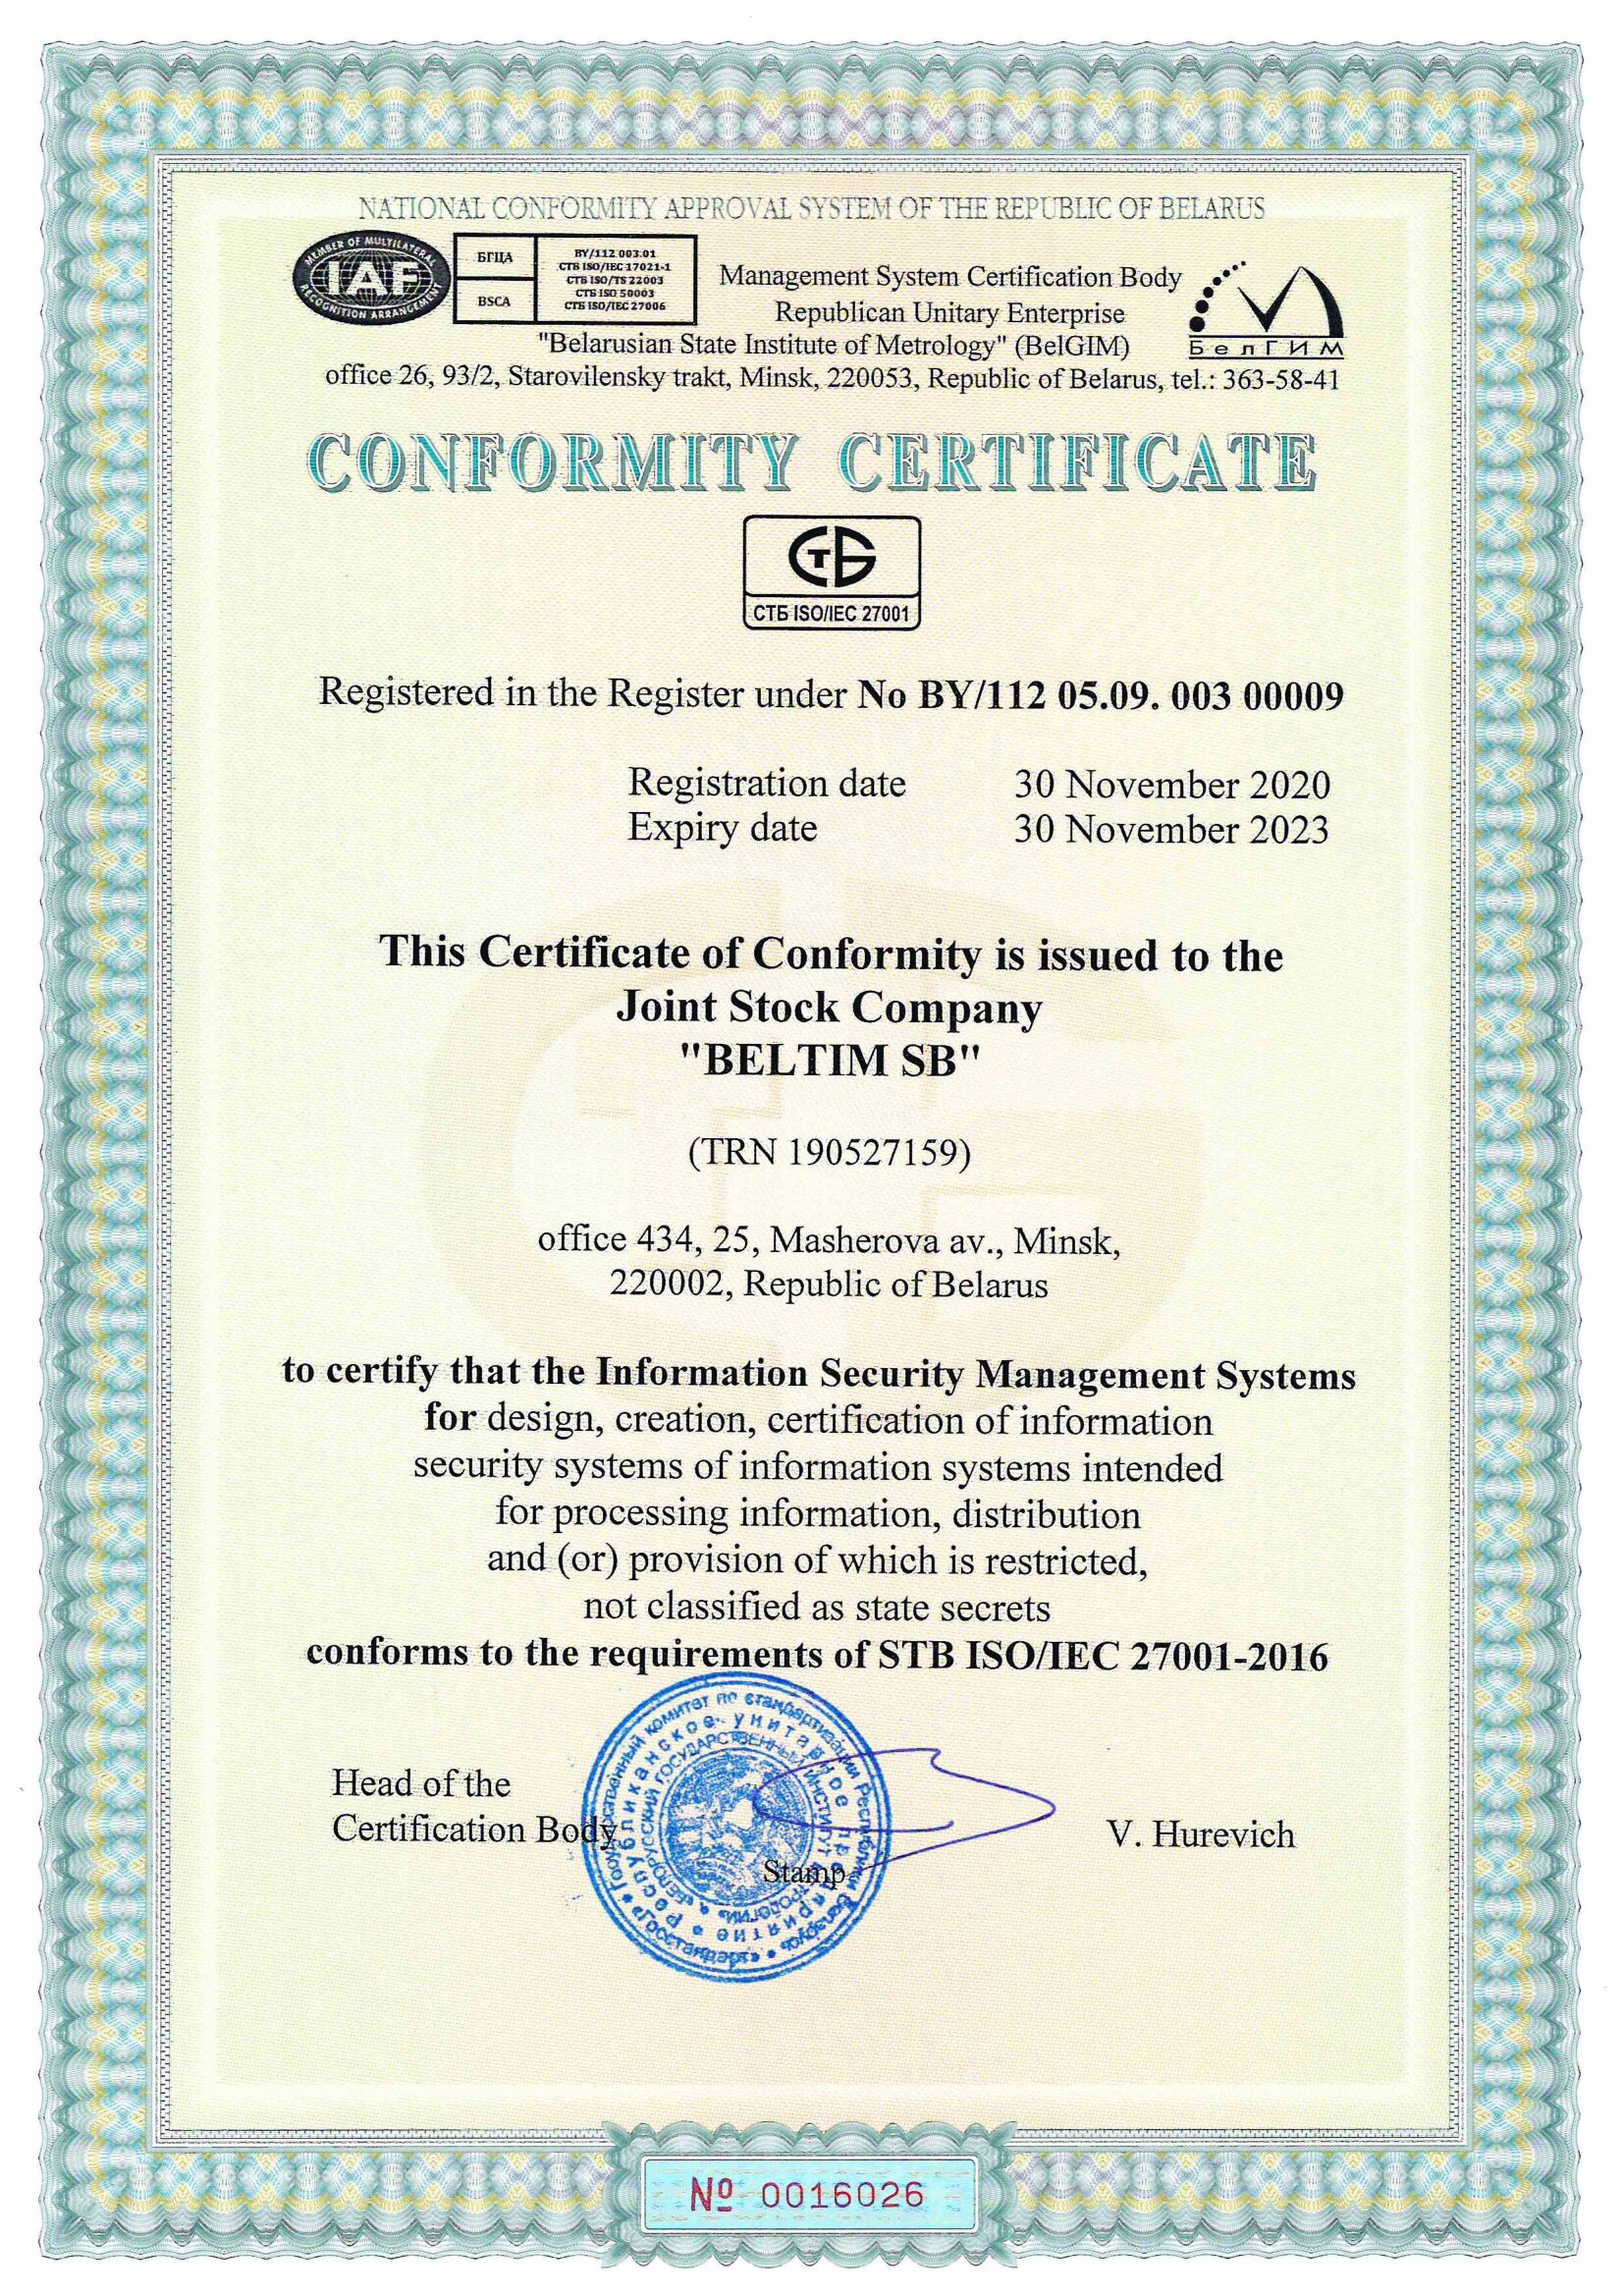 Compliance certificate of STB ISO/IEC 27001-2016 requirement